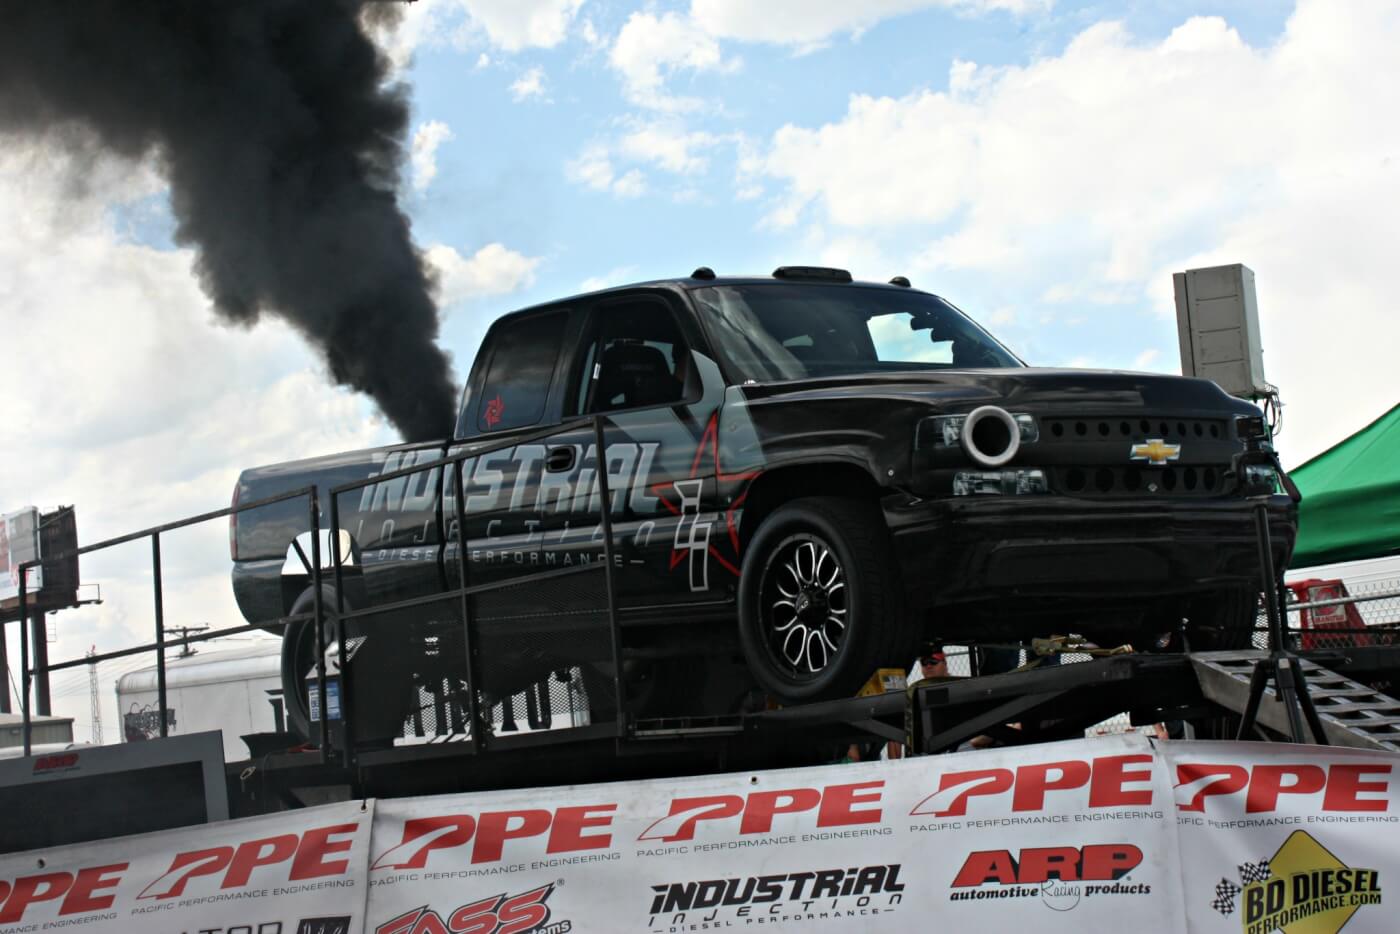 After a catastrophic engine failure just two weeks prior, the Industrial Injection Duramax was back up and running with another full competition motor, ready for the rollers again. On the hunt for that ever so impressive 2000hp, they opted to play it safe on the virgin engine and keep the nitrous jets conservative—if you can consider 1630hp conservative of course—which was still enough to claim highest horsepower on the day.